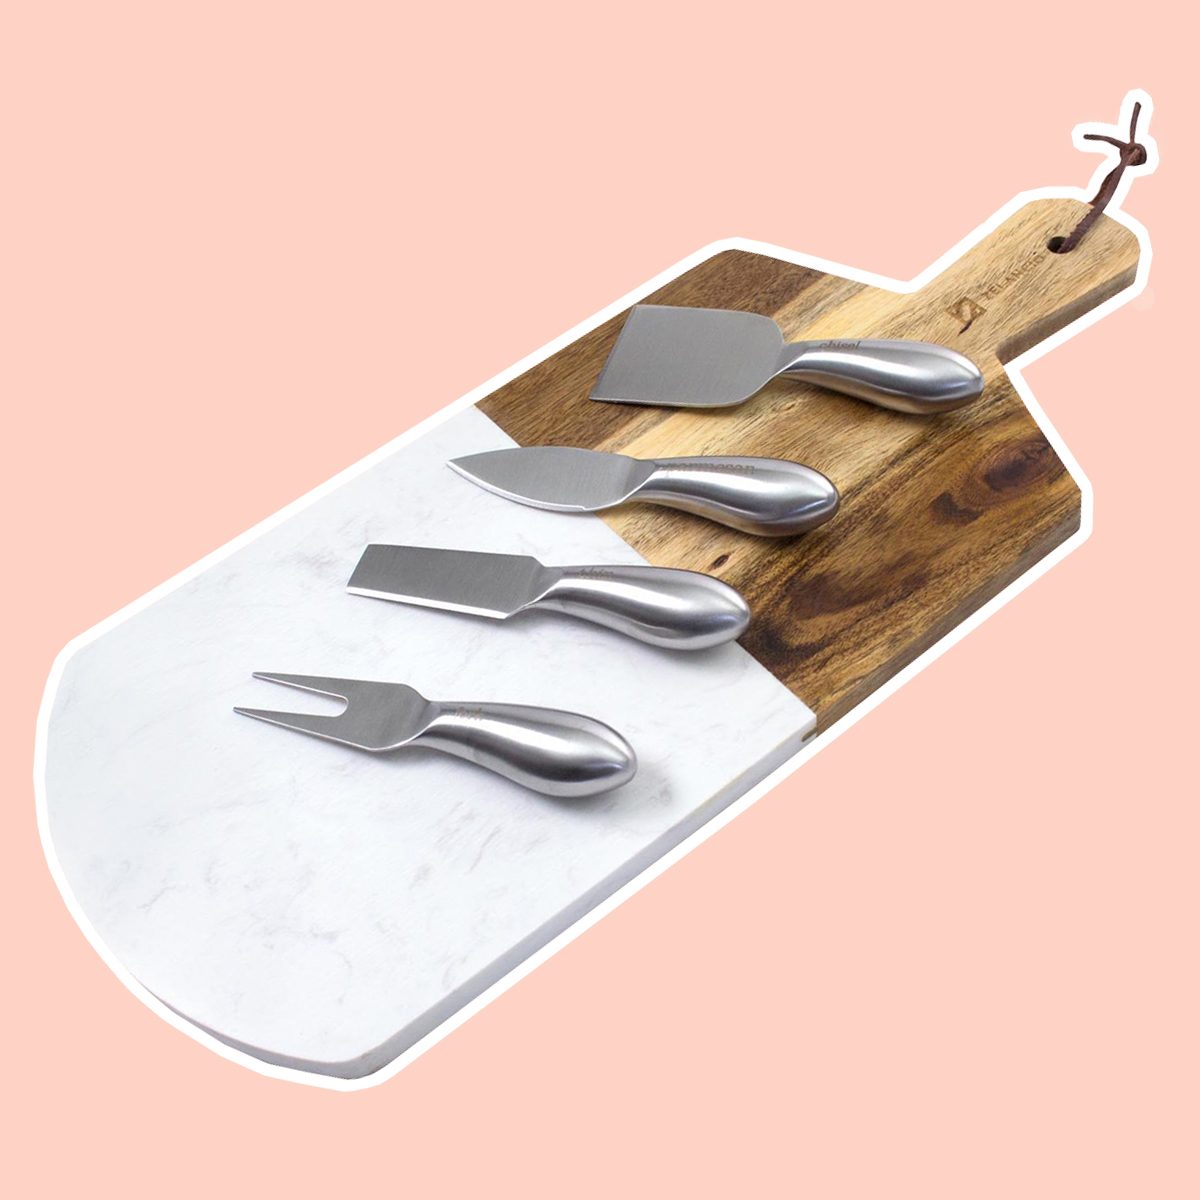 Zelancio Marble and Acacia Wooden Serving Cheese Board, 6 Piece Set Includes Stainless Steel Cheese Tools, Serving Paddle, Wood Cheese Knife Holder with Integrated Magnets